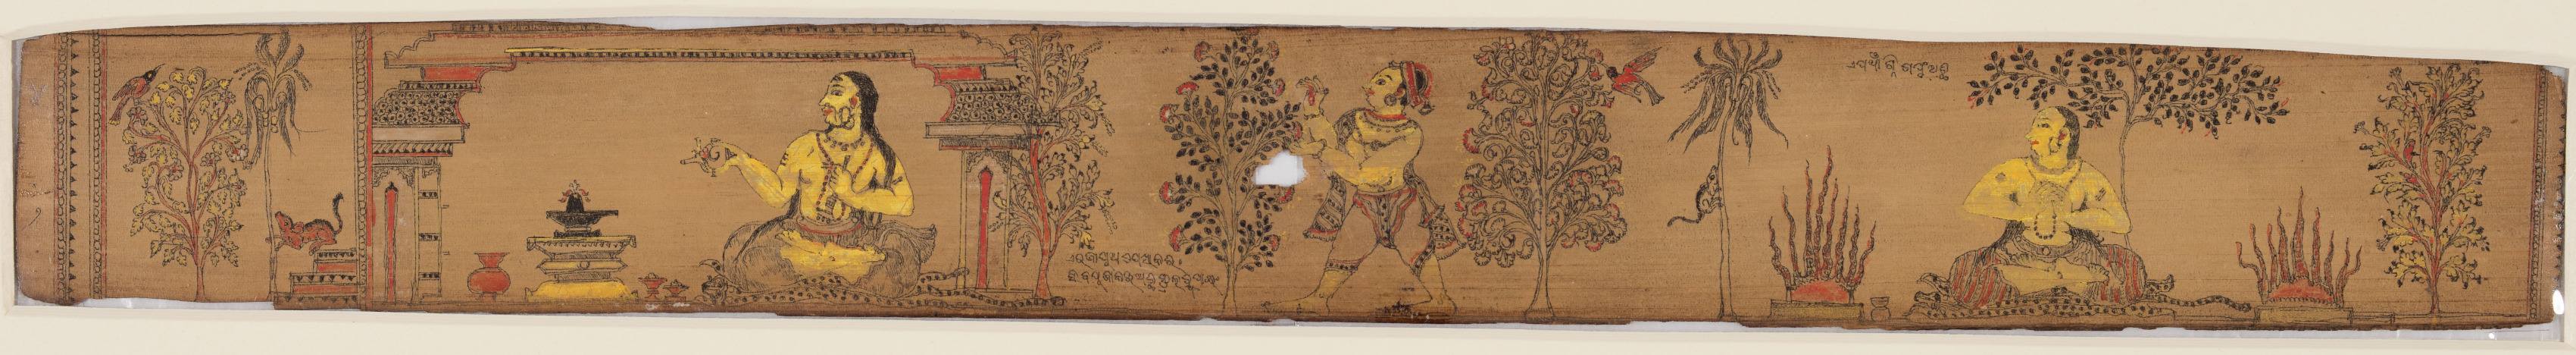 A Prince Performs Austerities (recto), from a Romance of Chandrabhanu and Lavanyavati of Upendra Bhanja (1670–1740)